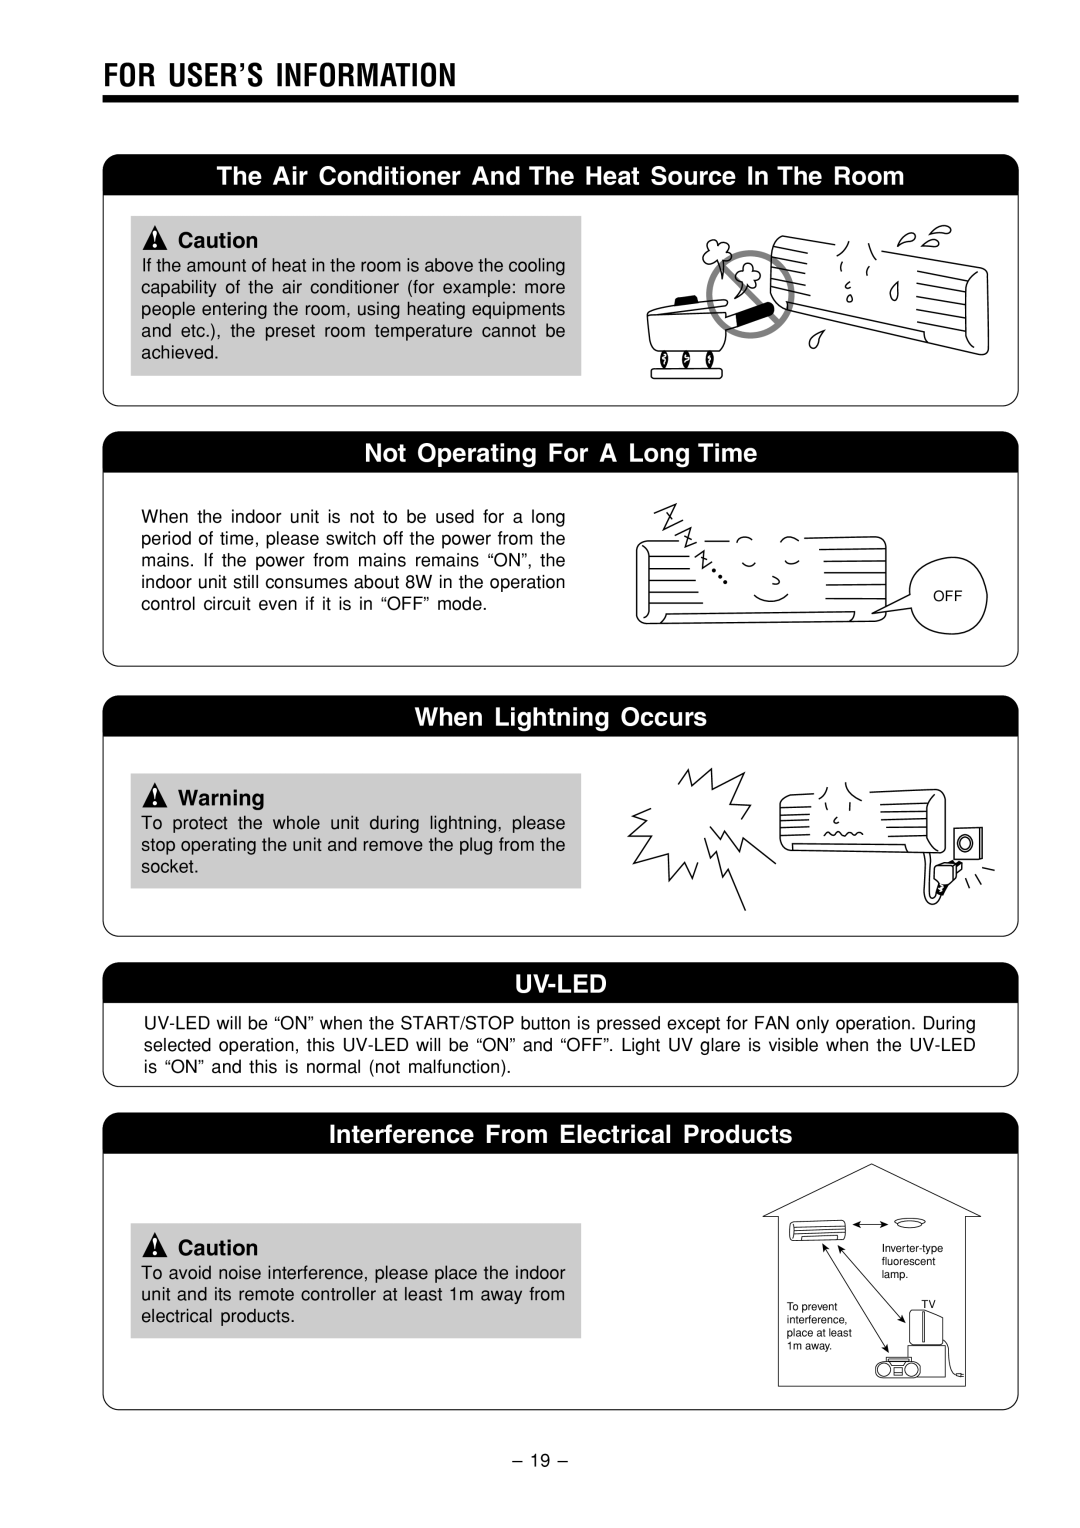 Hitachi RAS-51CHA3 instruction manual For User’S Information, Not Operating For A Long Time, When Lightning Occurs, Uv-Led 